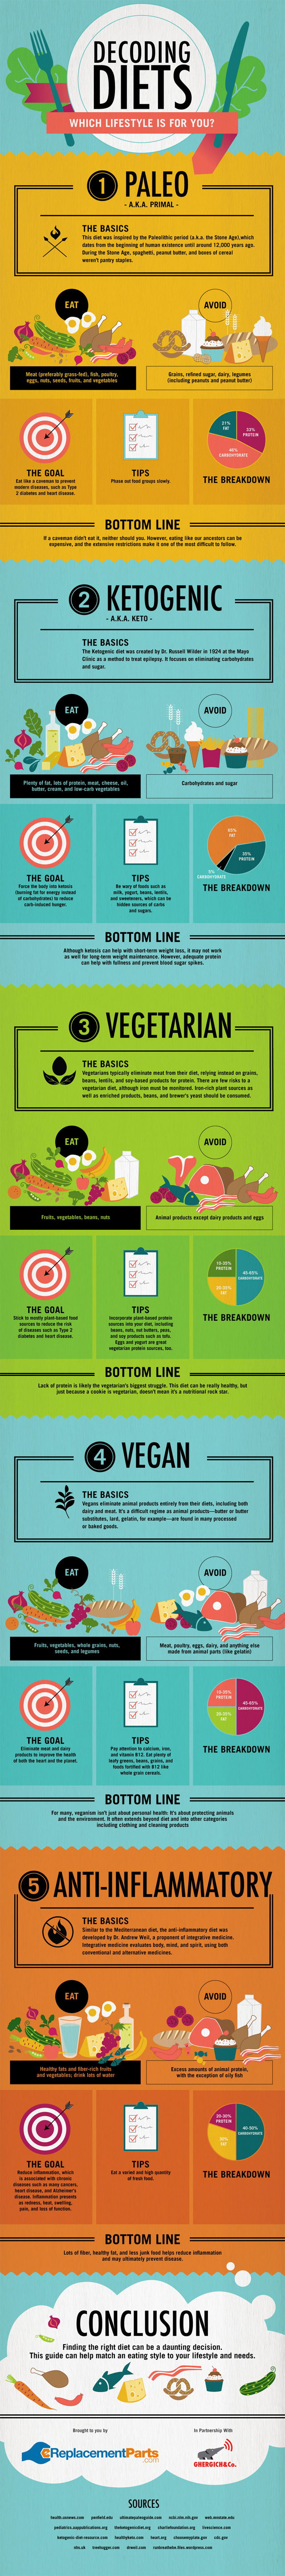 All About Diets: Which One Will Work For You? Infographic